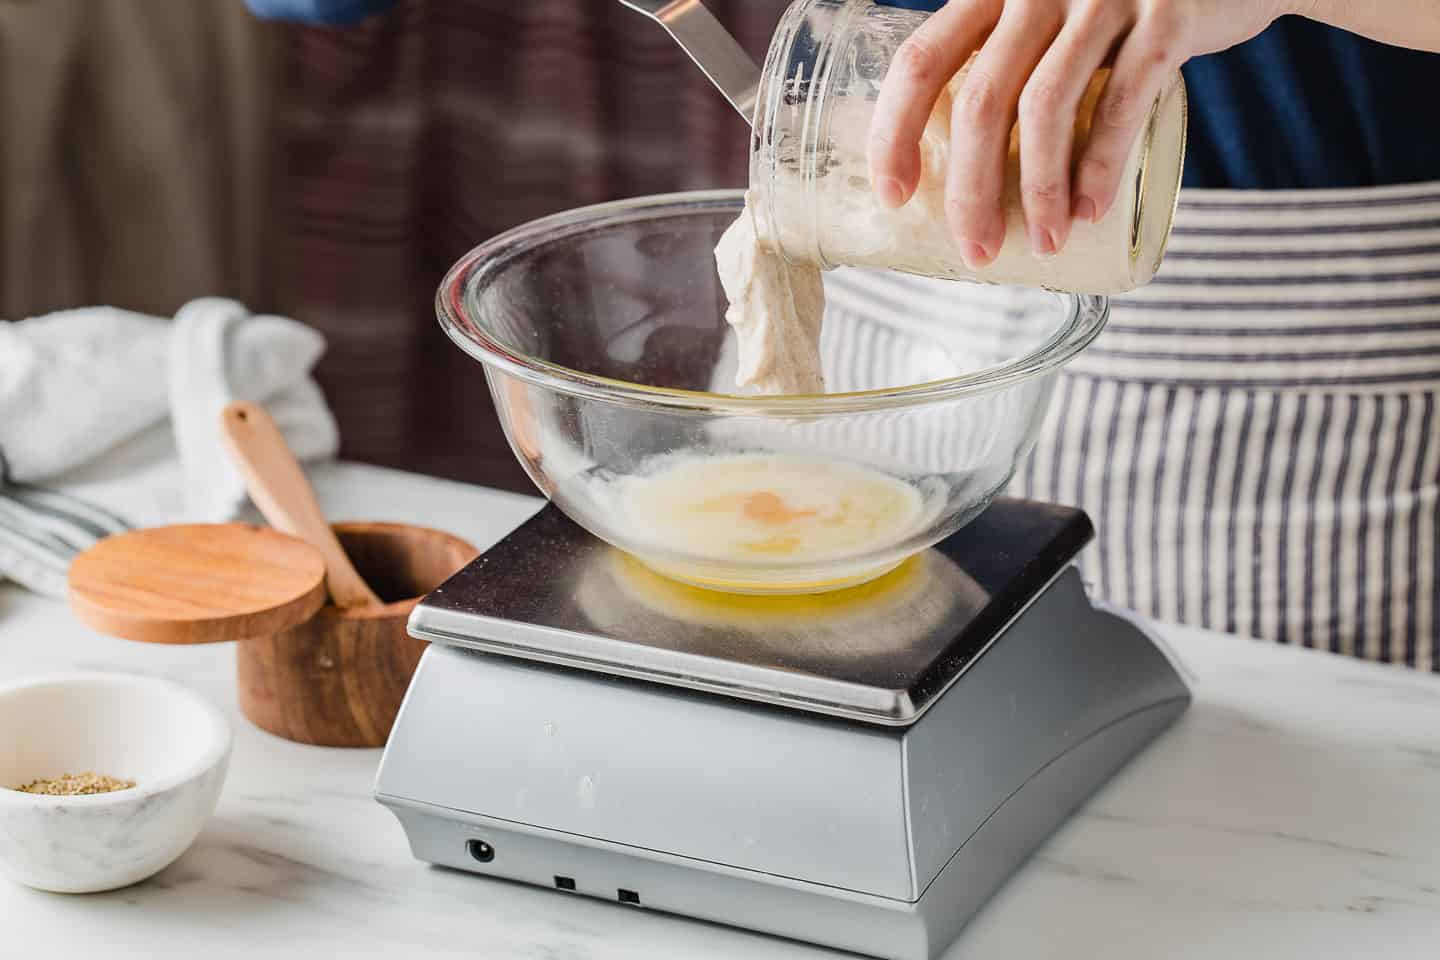 A woman weighing sourdough discard ingredients with a kitchen scale.